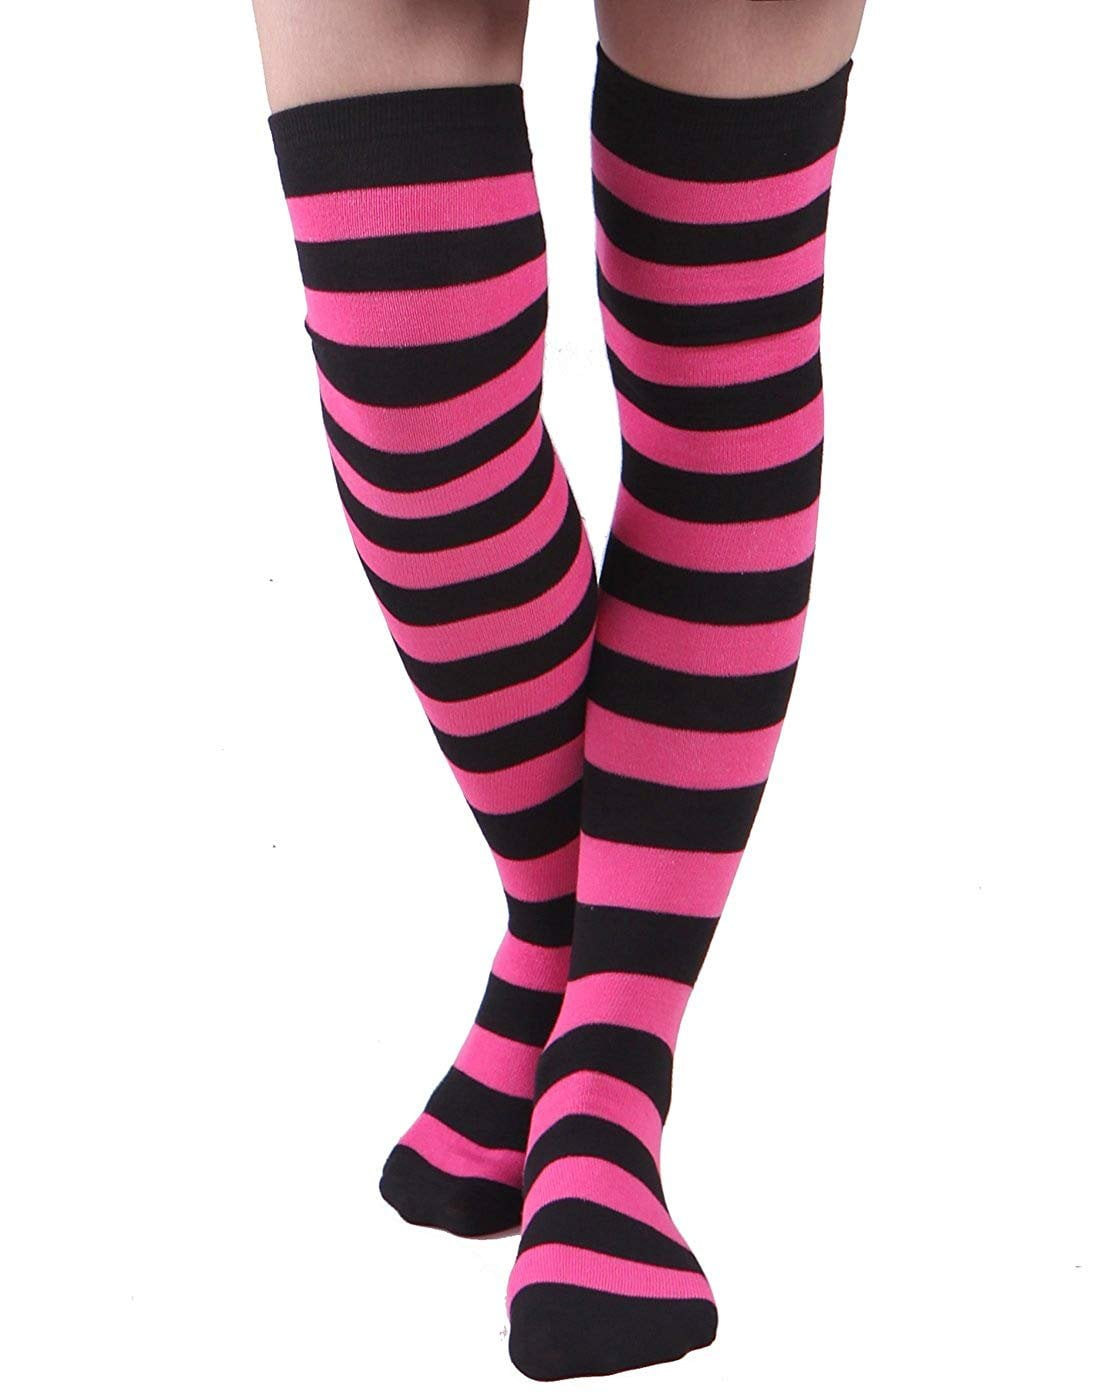 New Ladies or Teens Yellow and Green Stripe Over The Knee Socks Fancy Dress 